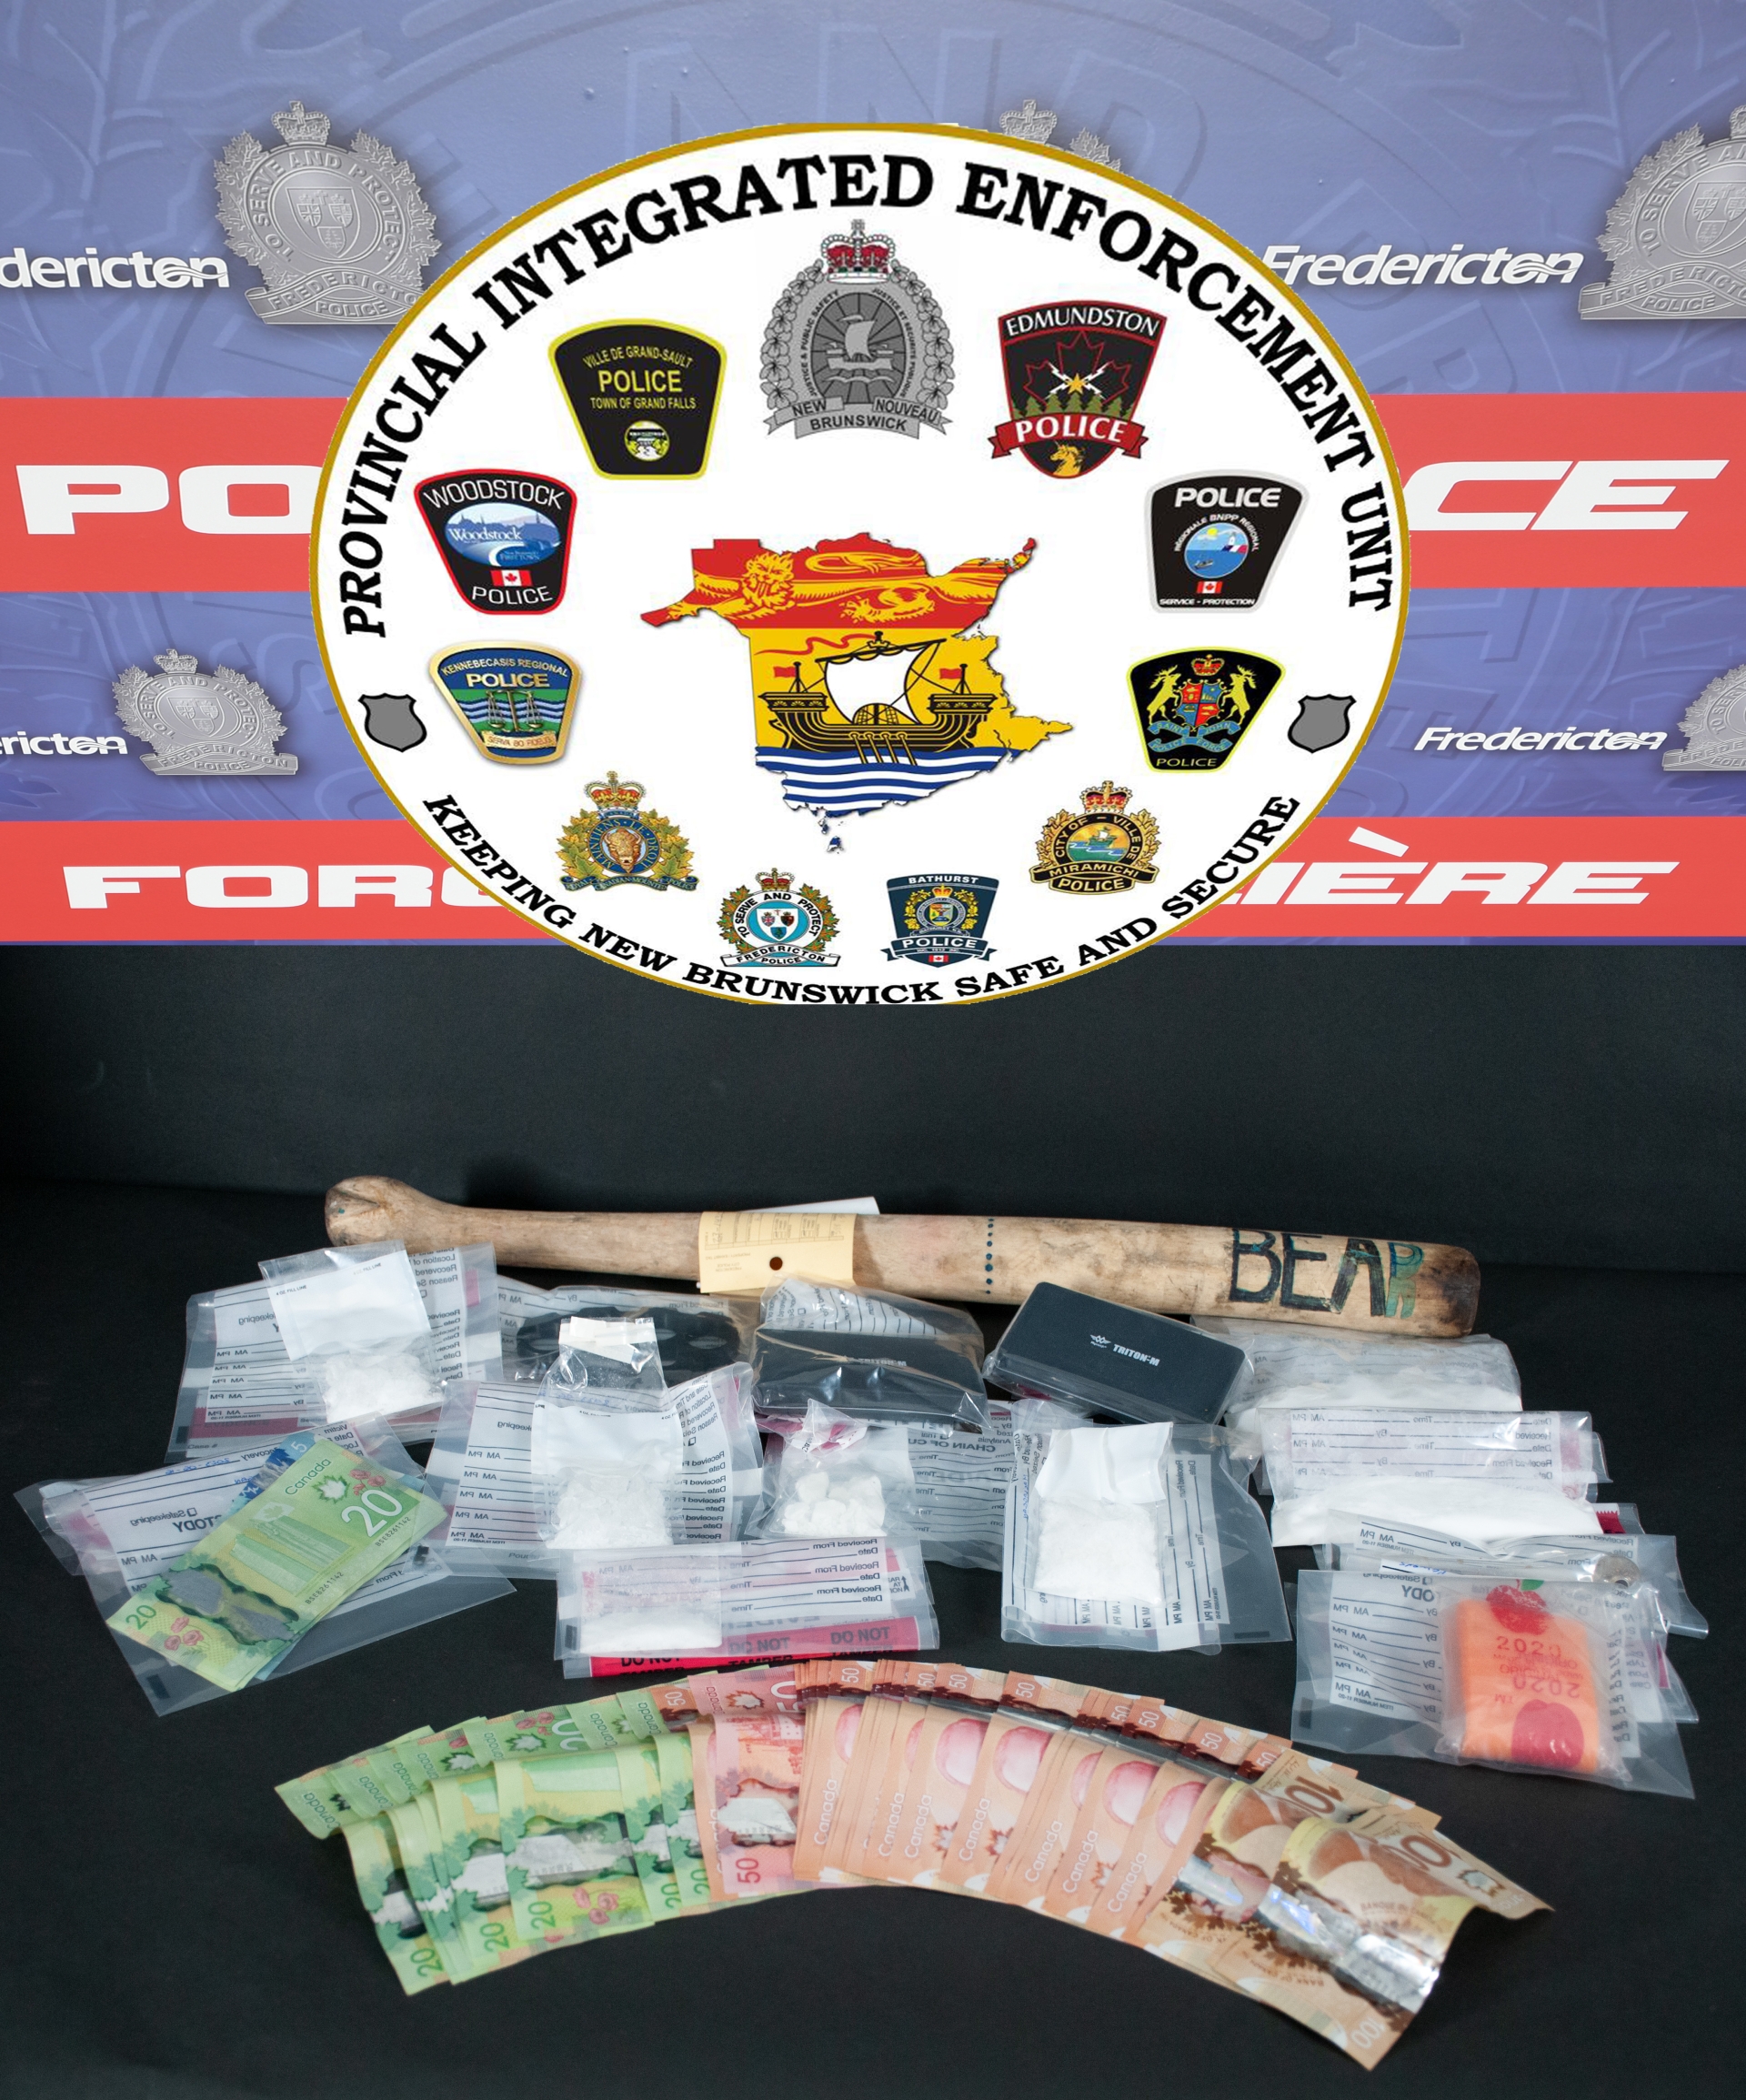 image of drugs and Canadian currency seized during arrest